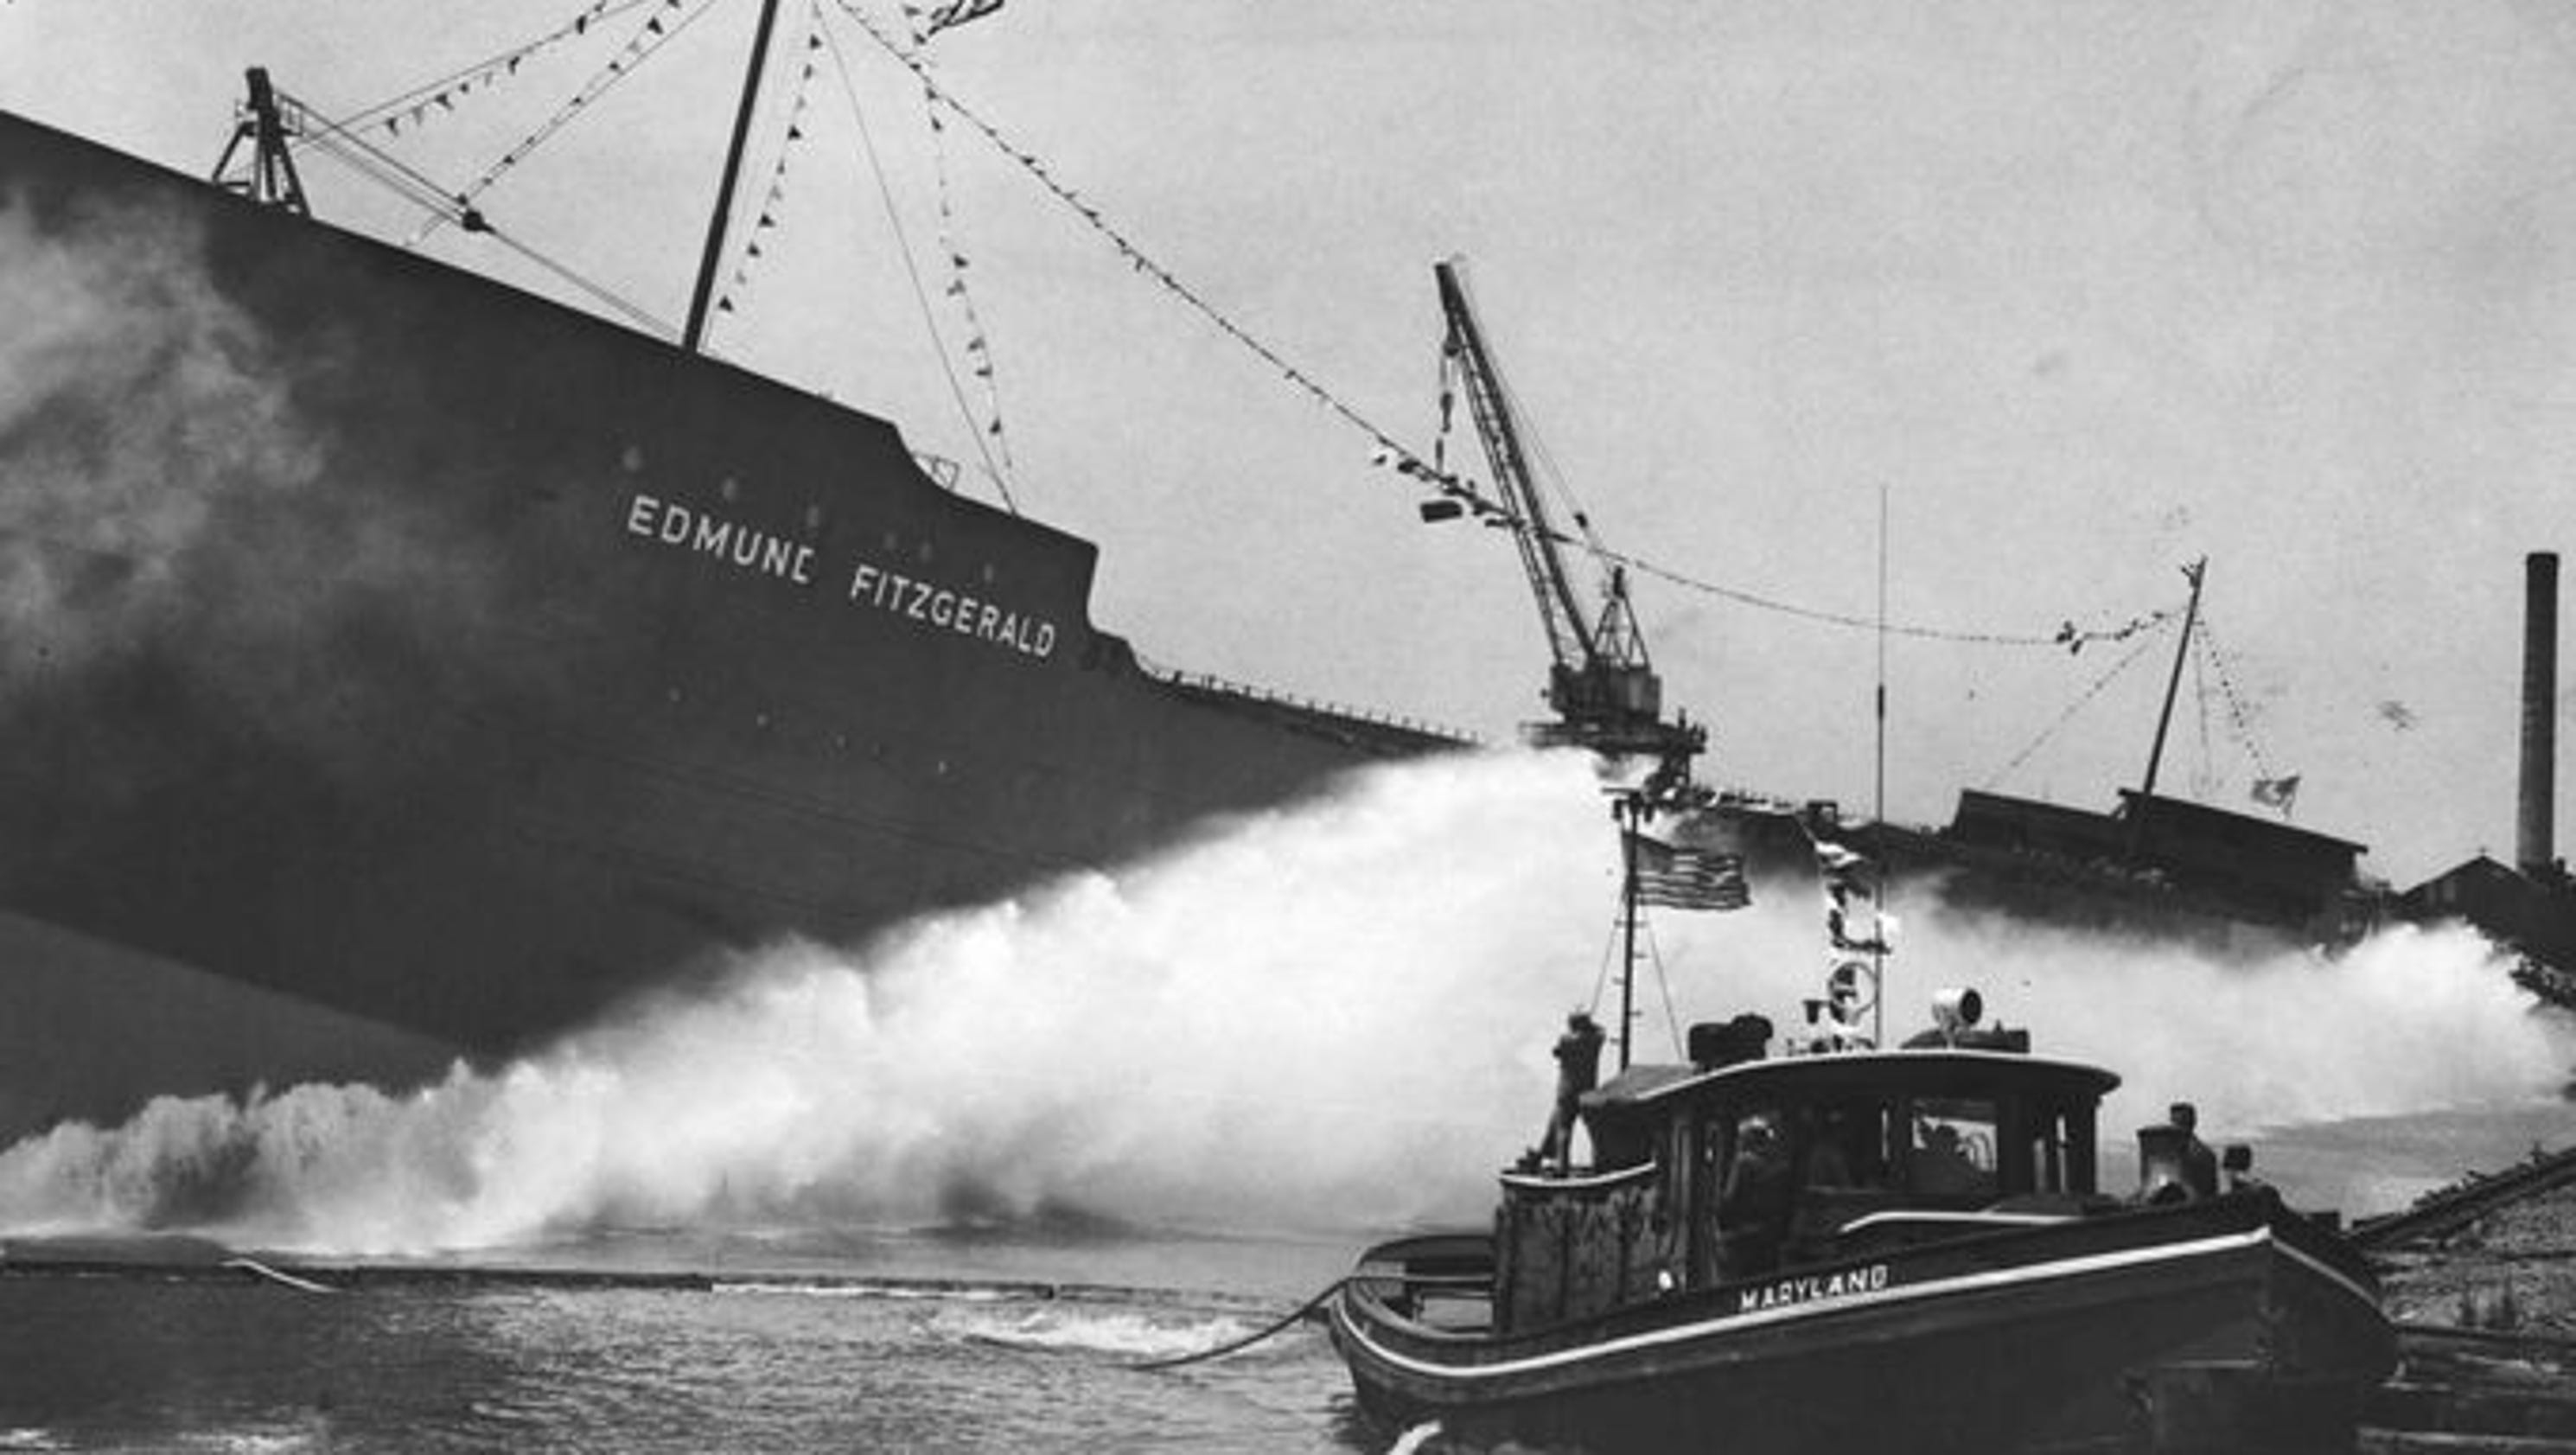 who was the captain of the edmund fitzgerald